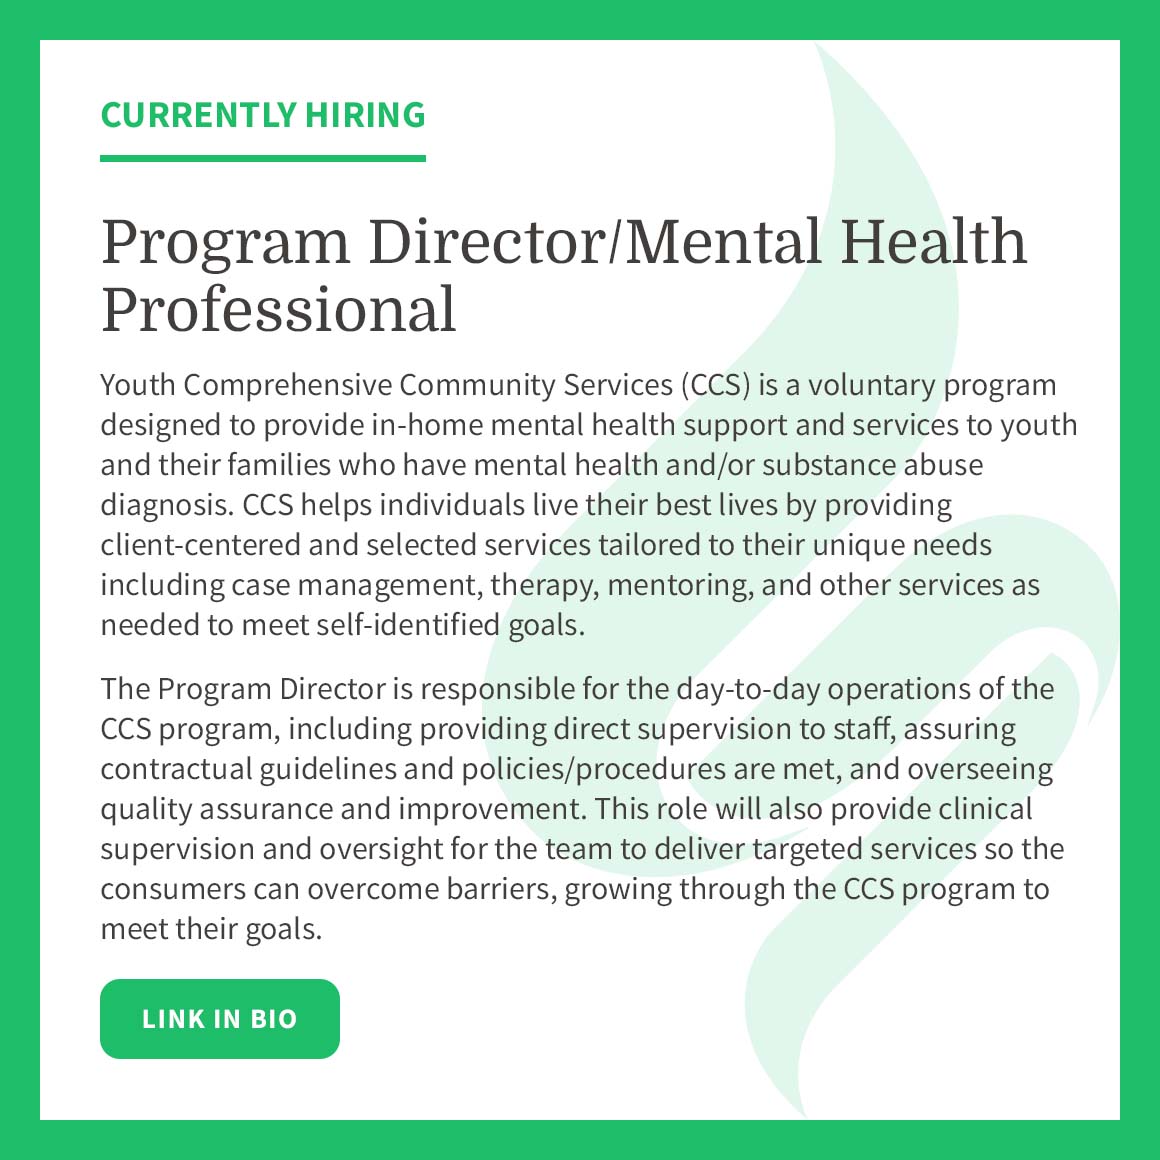 Apply: bit.ly/3vEJ0Vh #youth #comprehensivecommunityservices #programdirector #mentalhealthprofessional #nonprofit #nonprofitjobs #mentalhealth #casemanagement #therapy #mentoring #substanceusedisorder #community #communitysupport #clinicalassessment #clinicalsupervision